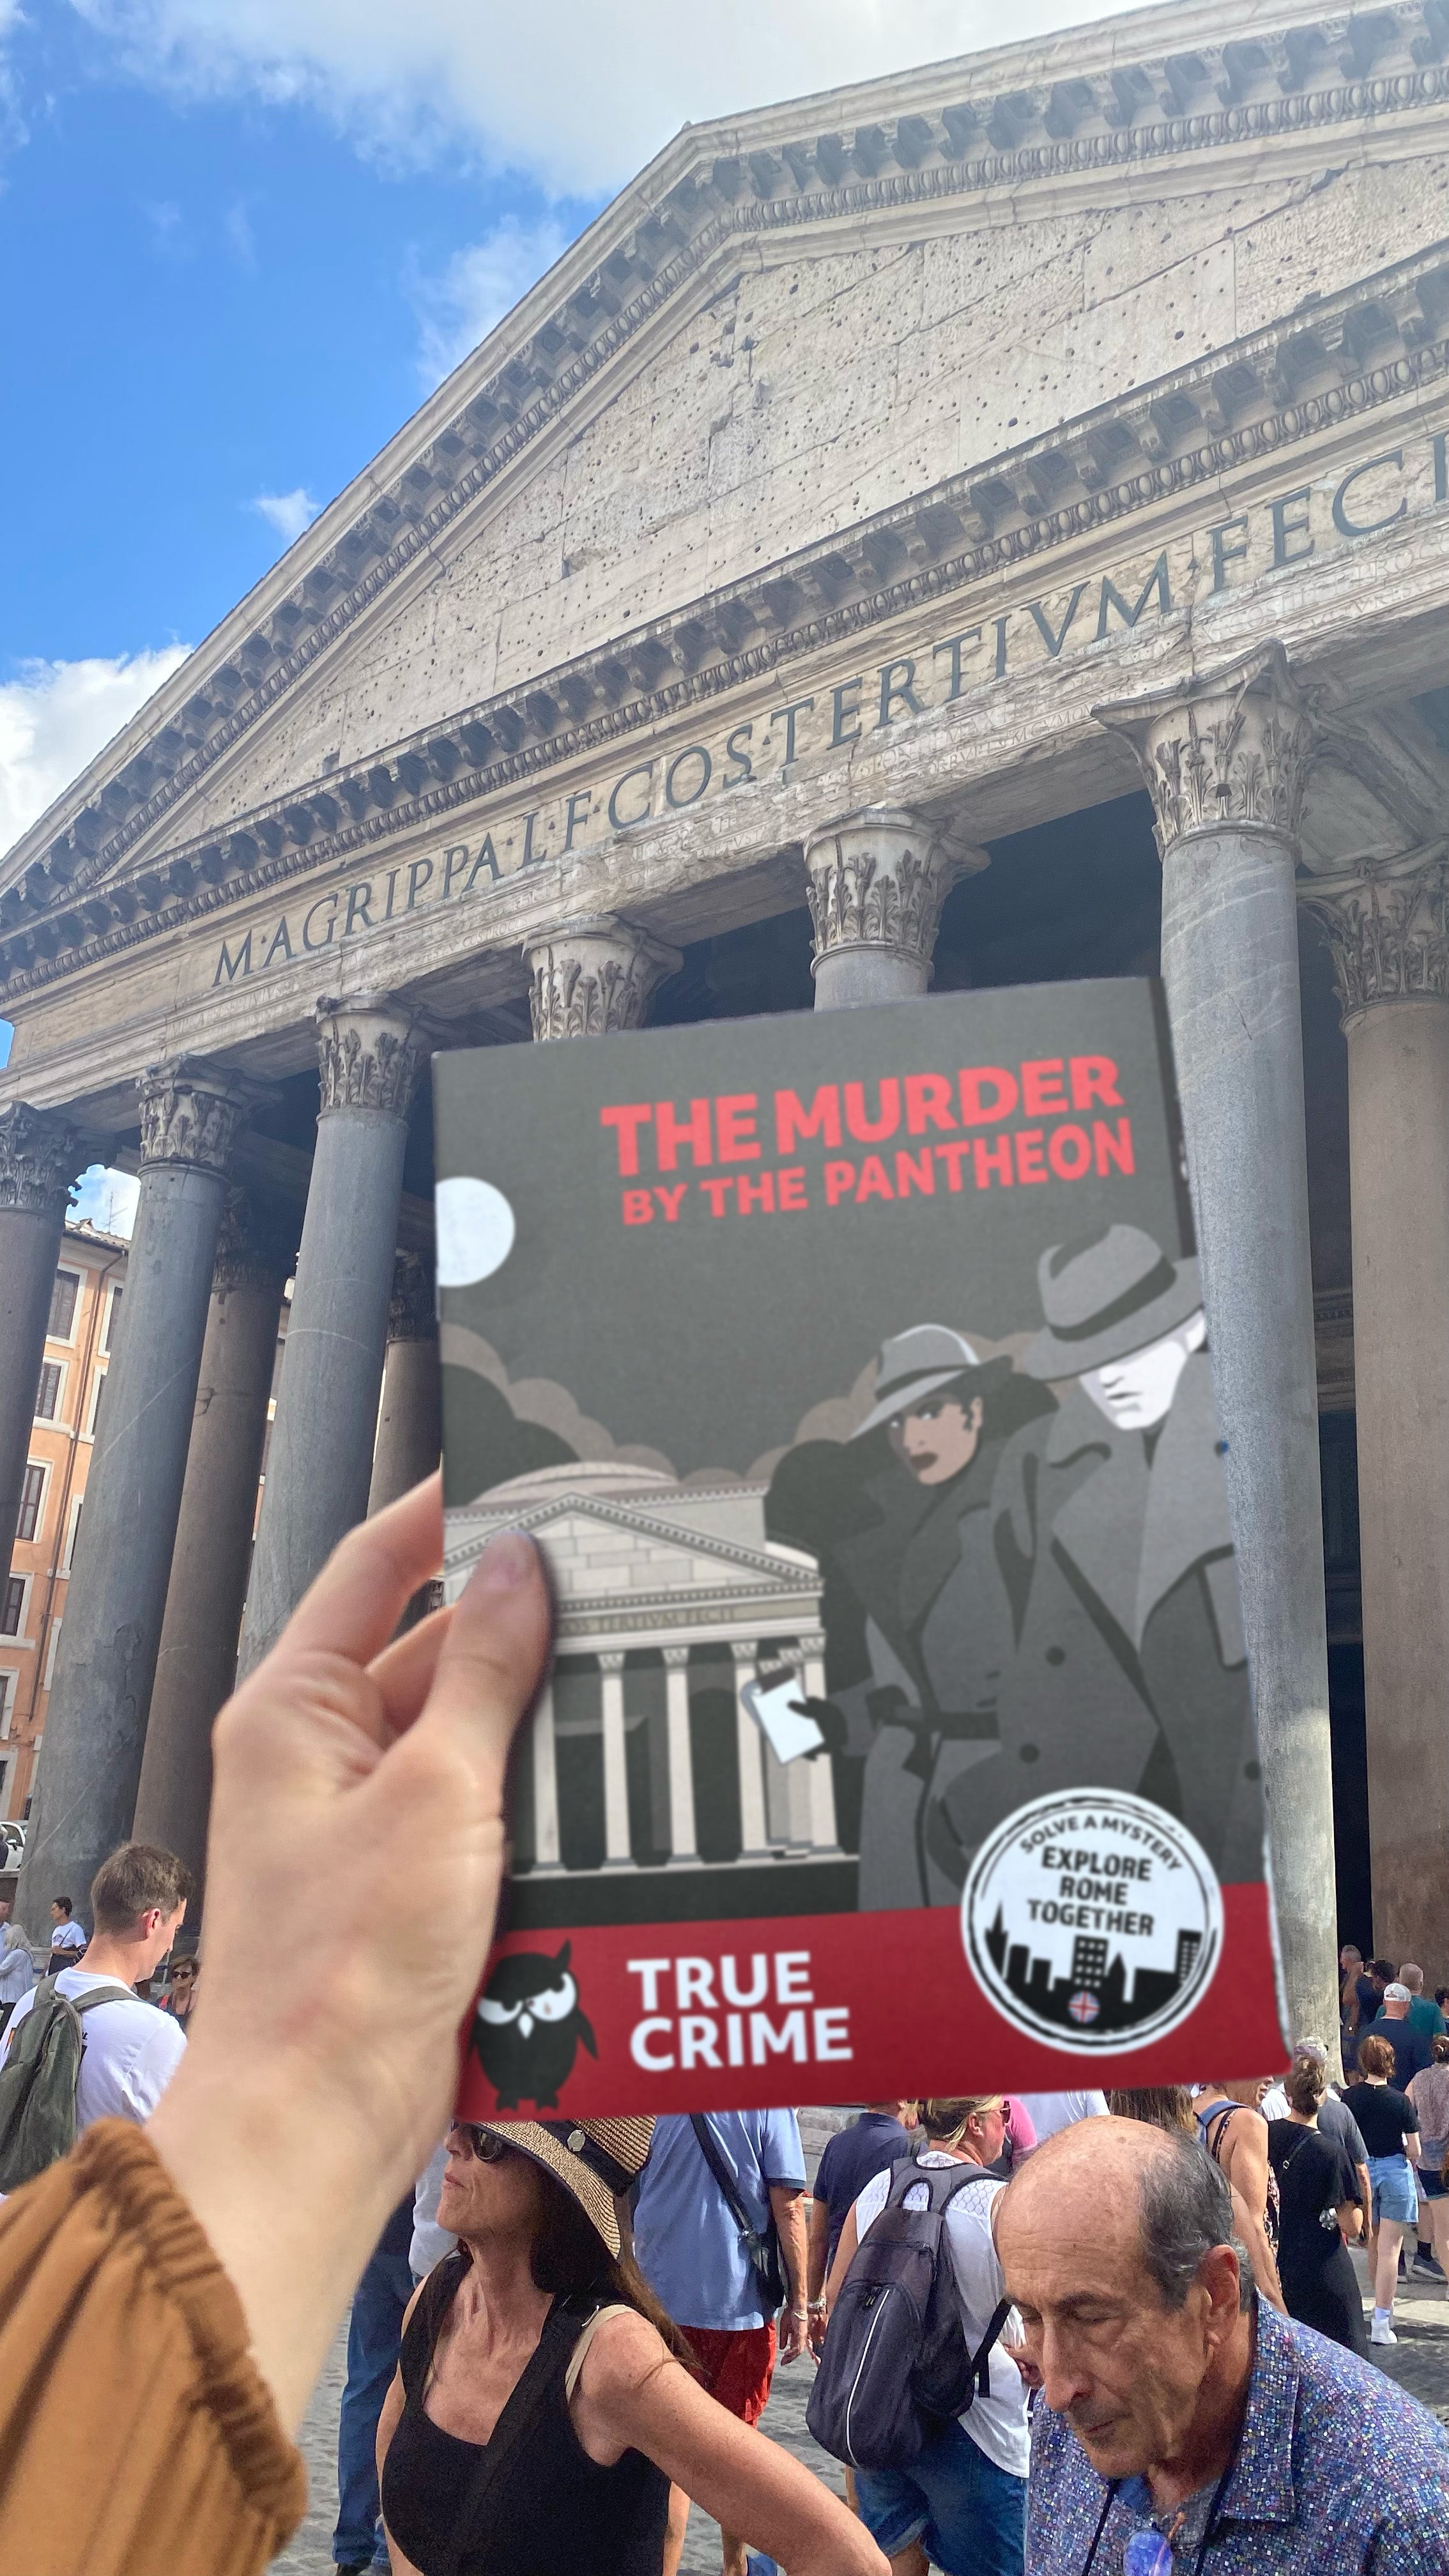 Rome - The Murder by The Pantheon